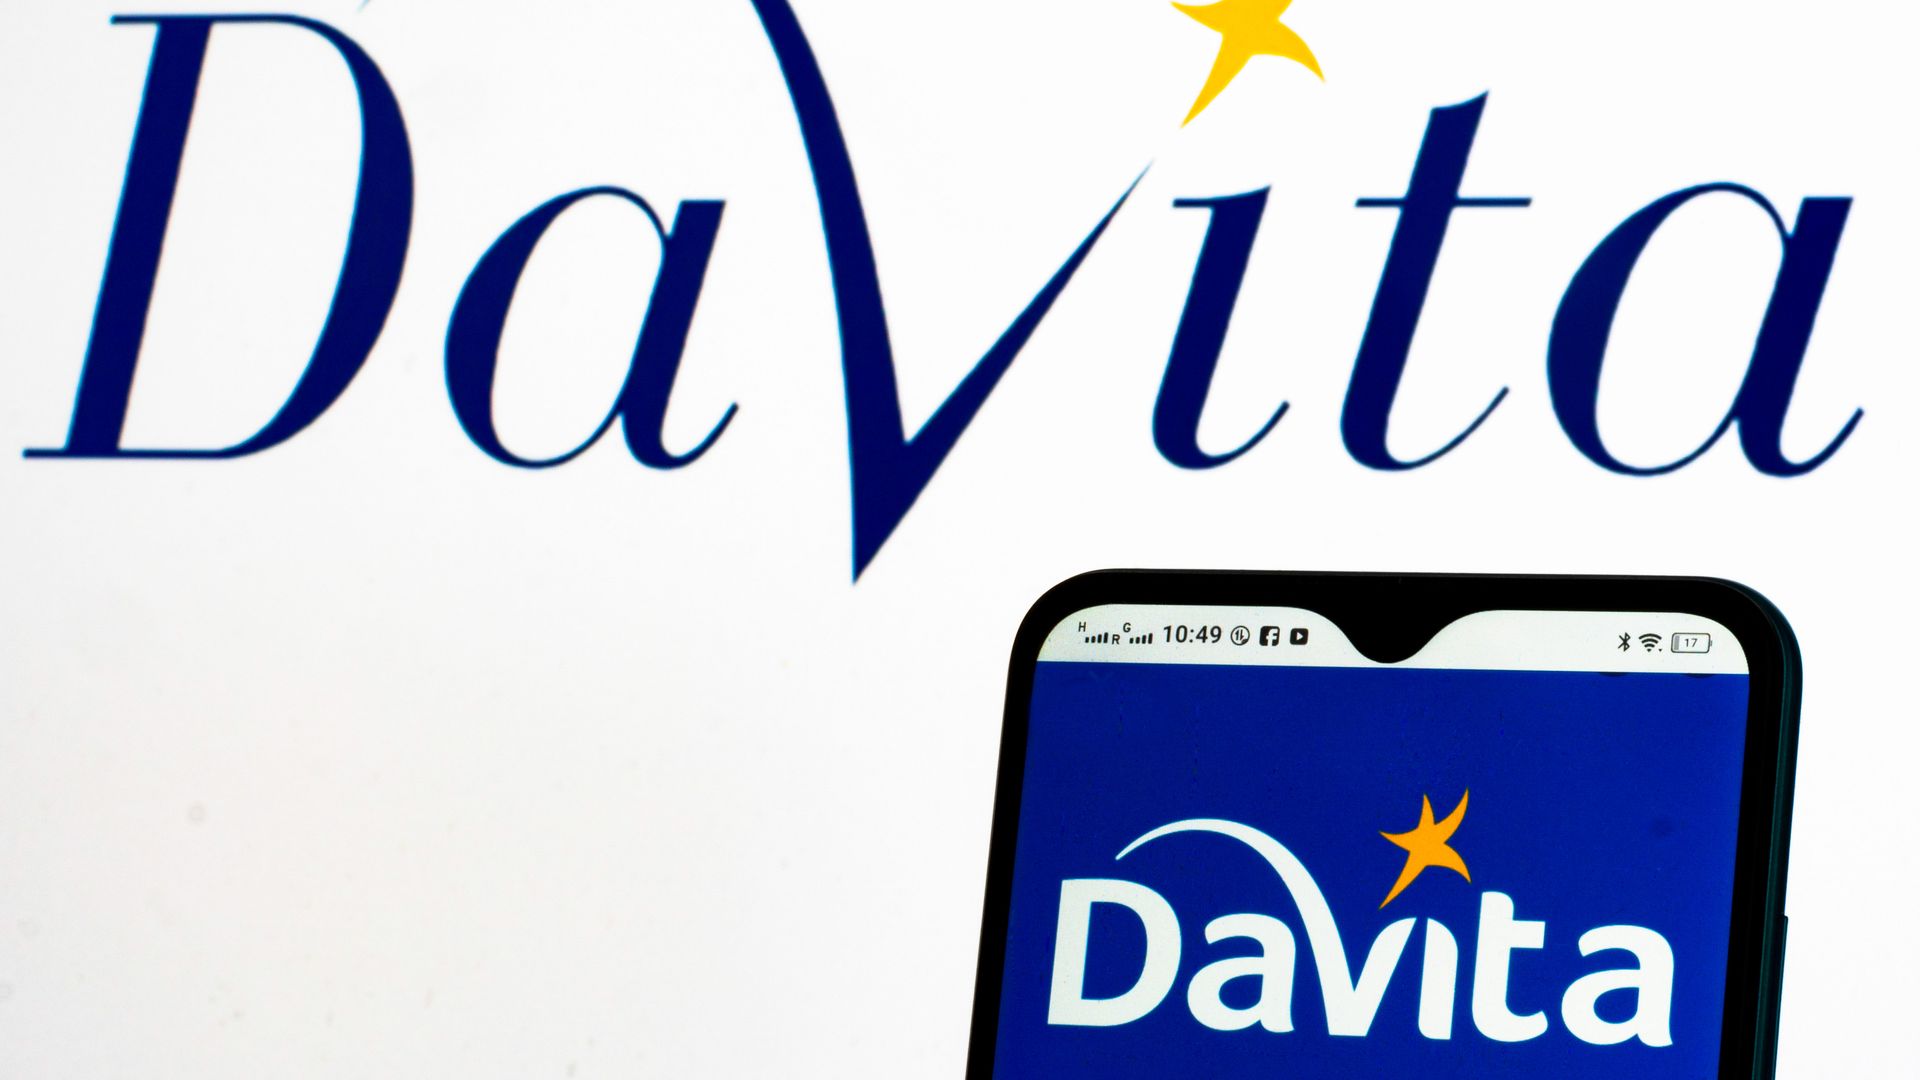 The DaVita logo on a blue background on a phone and on a white background.